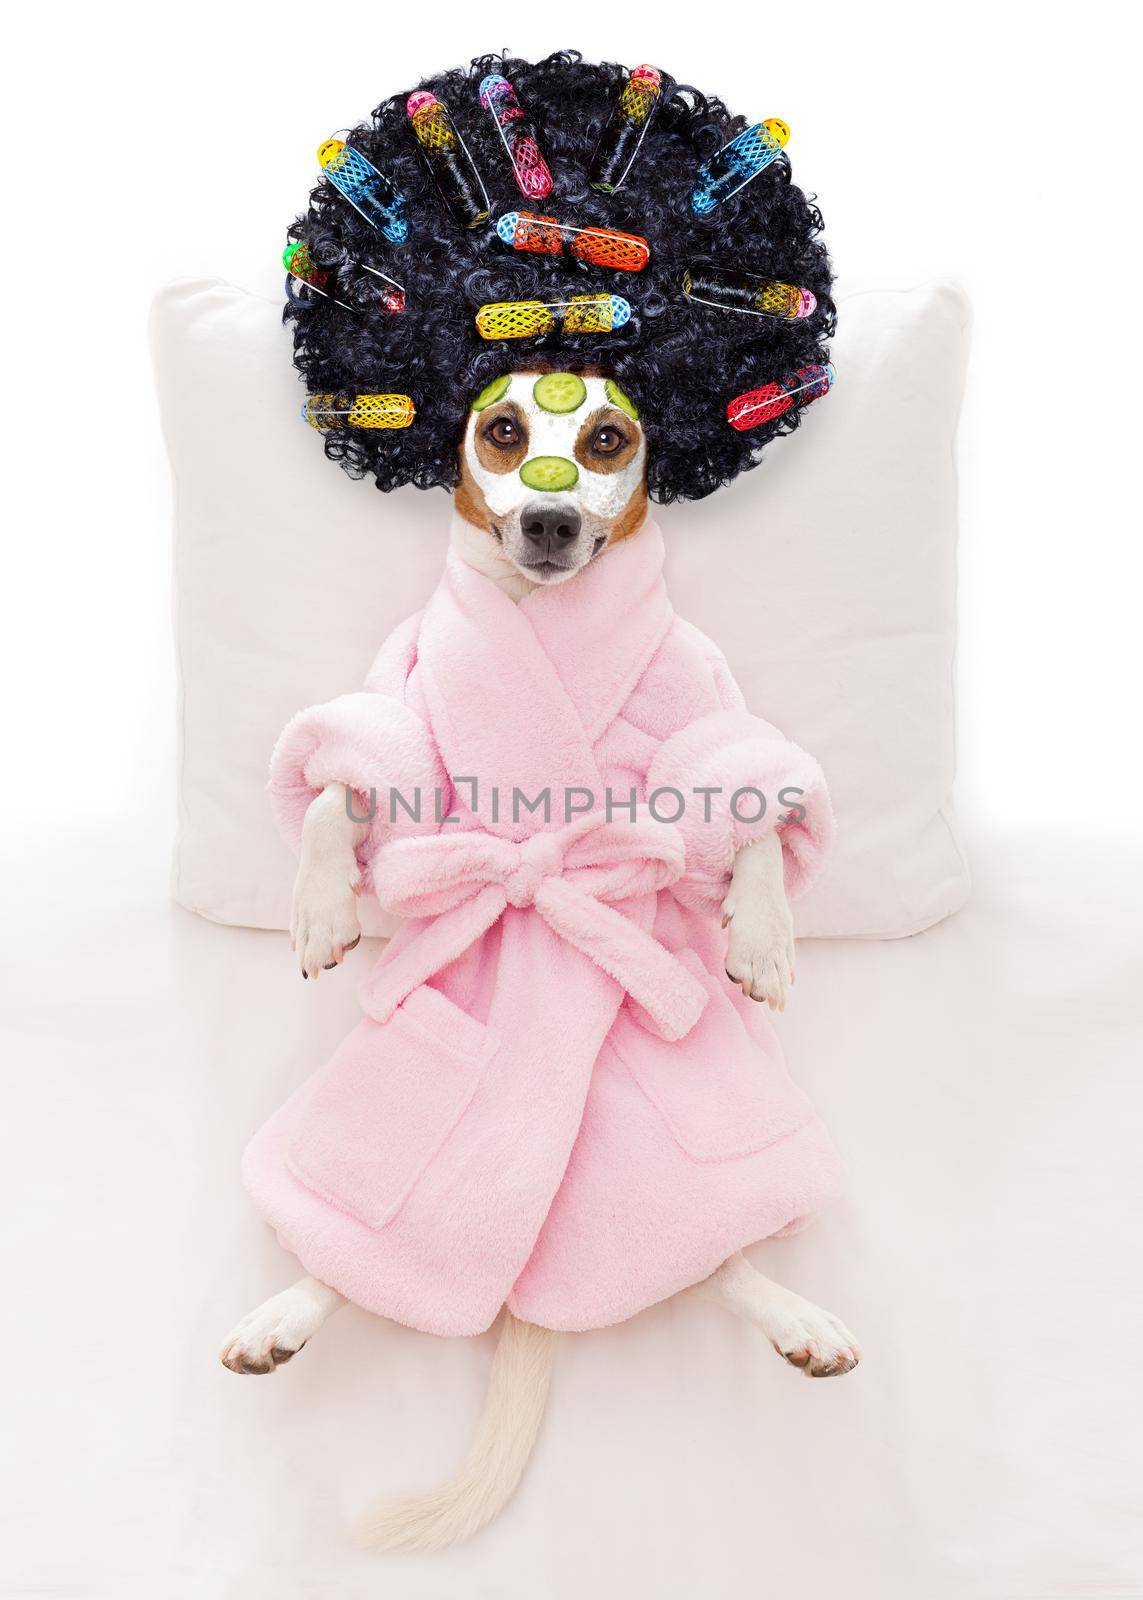 jack russell dog relaxing  and lying, in   spa wellness center ,getting a facial treatment with  moisturizing cream mask and cucumber and hair rollers